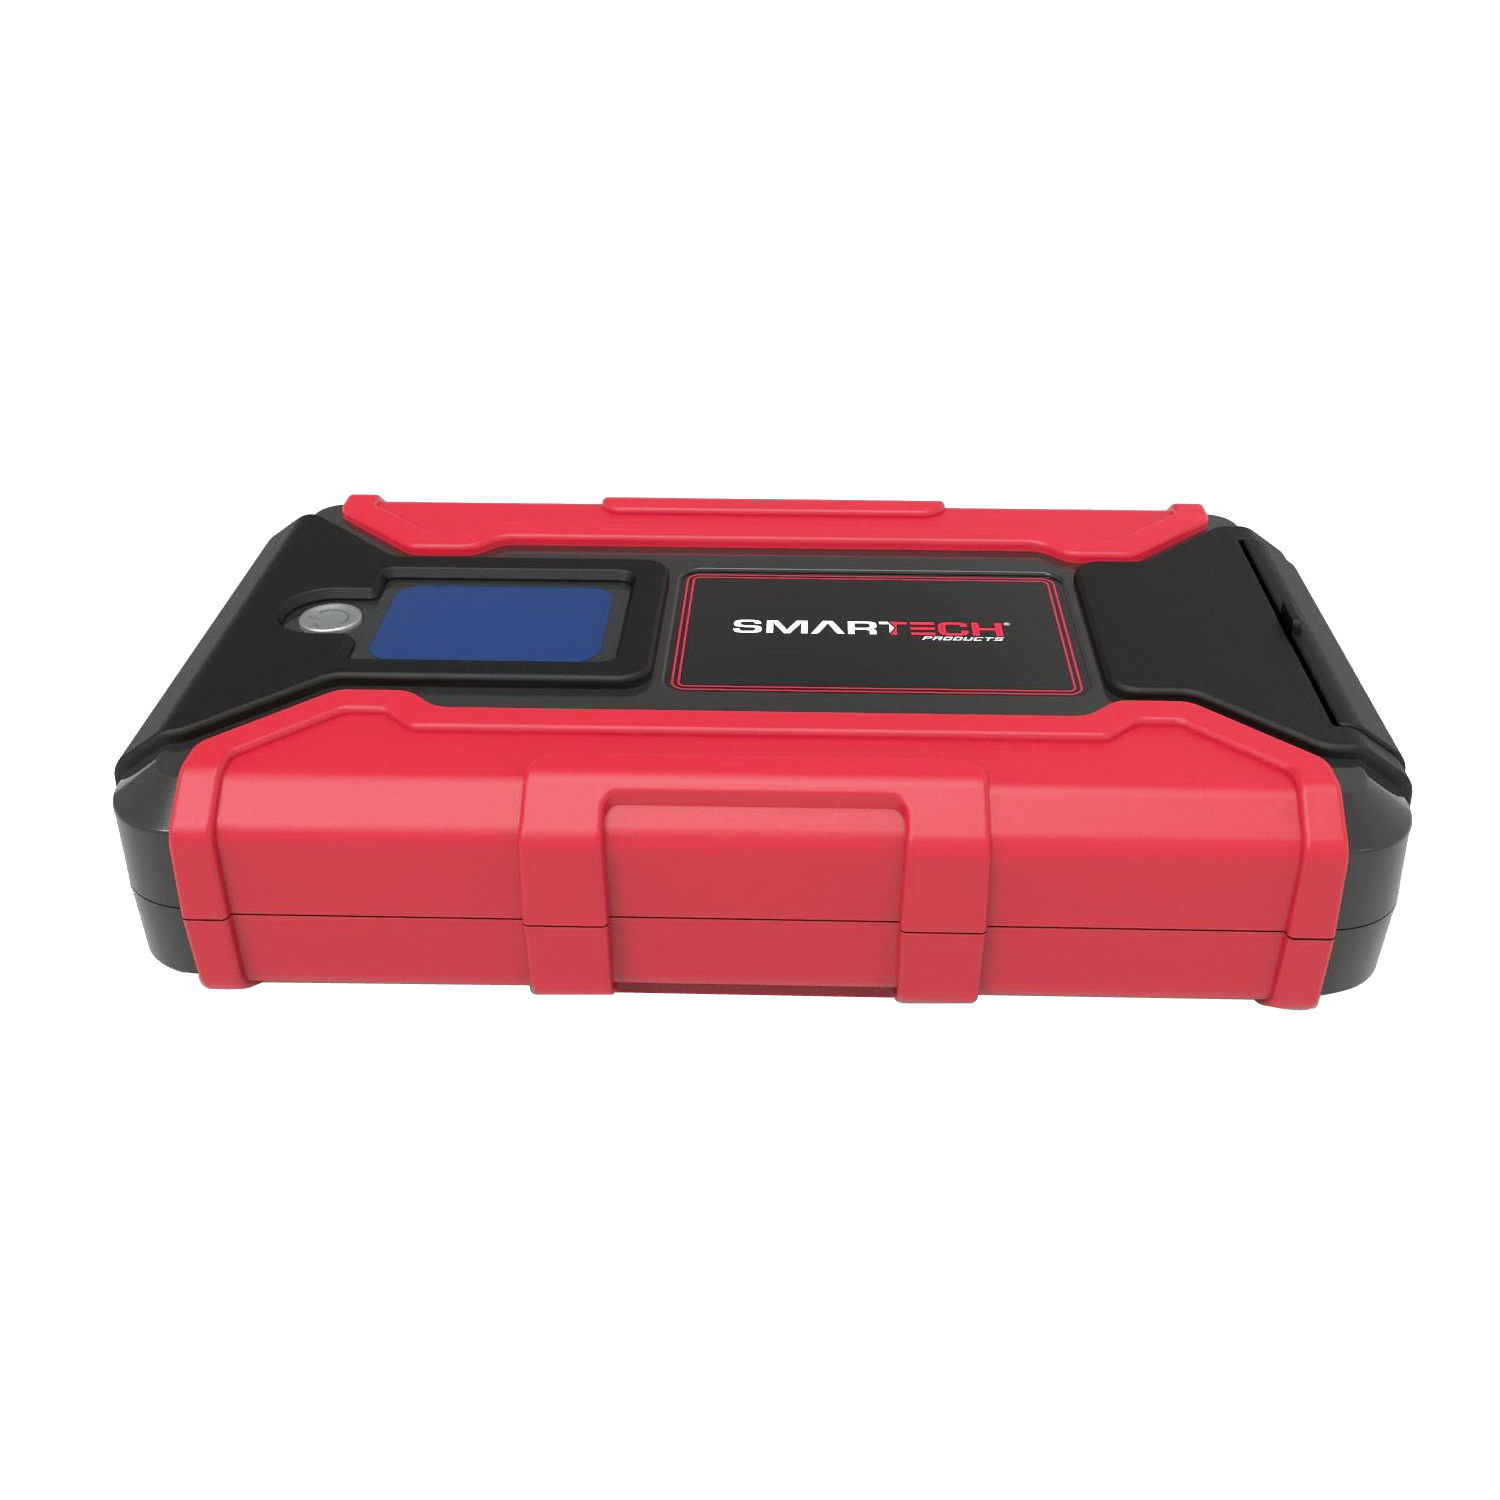 SMARTECH JS-15000N Vehicle Jump Starter and Power Bank, Lithium-Ion Polymer Battery - 4